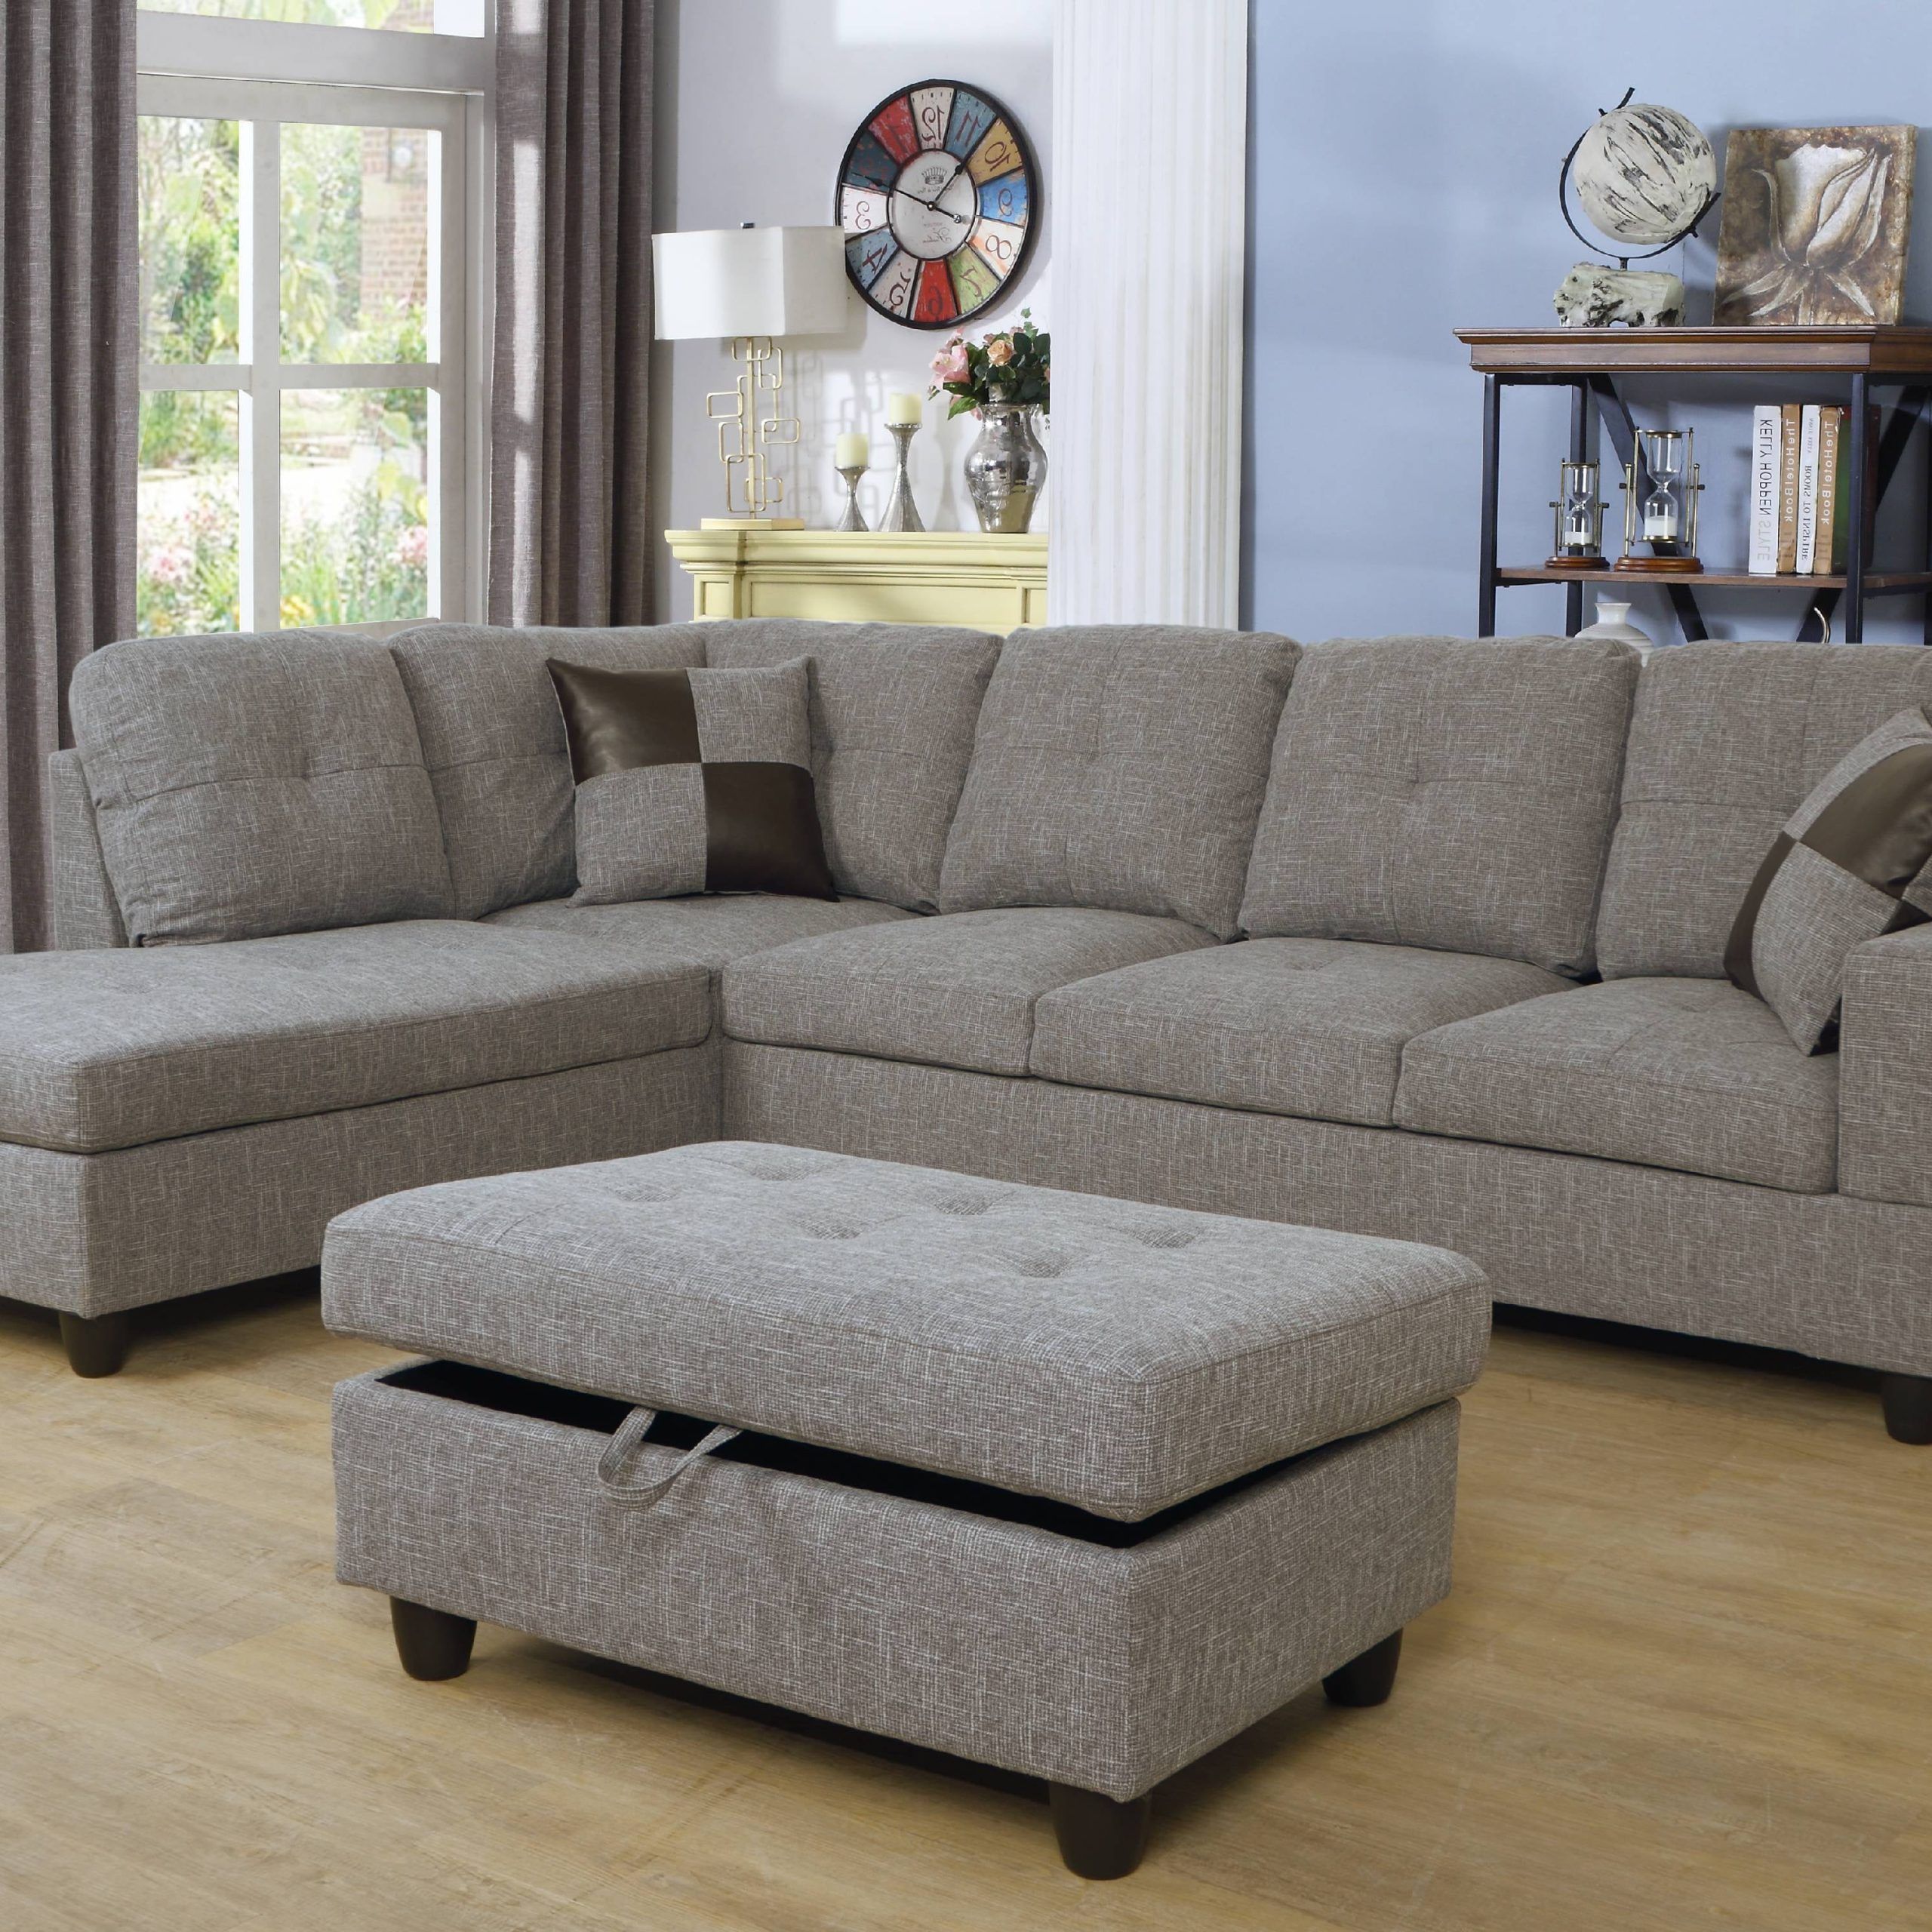 Ashey Furniture – L Shape Sectional Sofa Set With Storage Ottoman Intended For Most Recent Sofas With Ottomans (Photo 13 of 15)